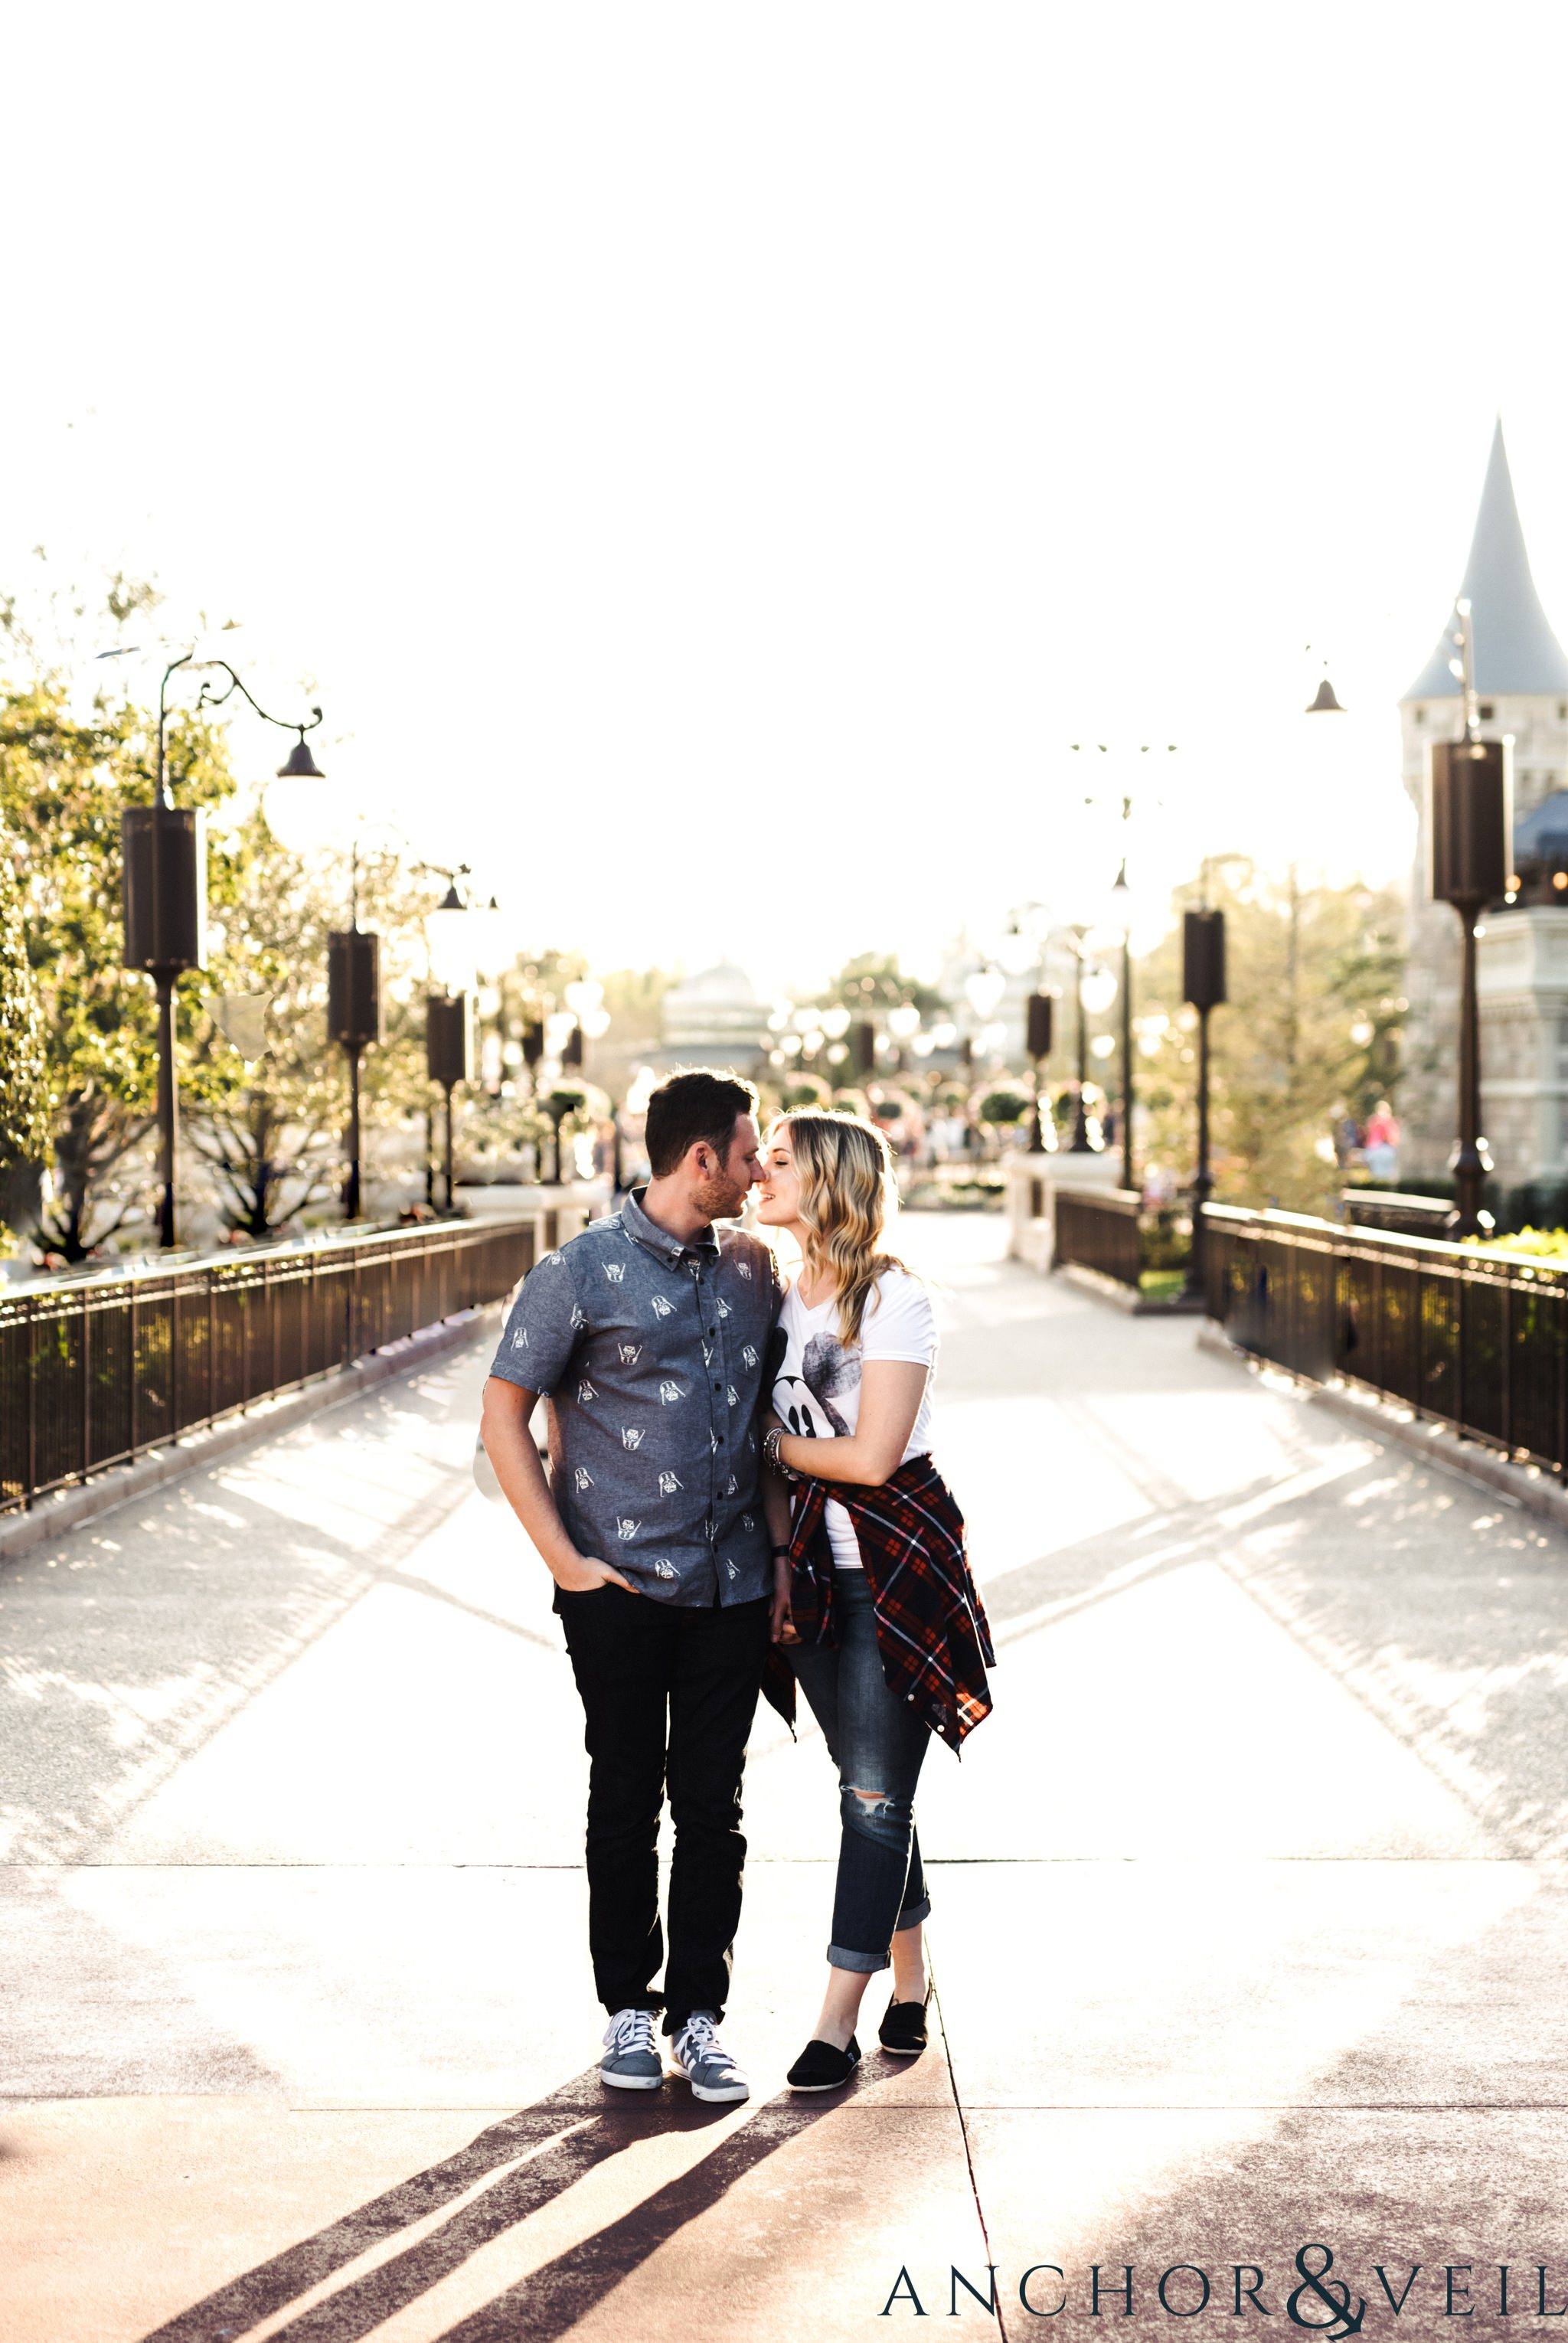 almost kissing on the bridge during their Disney world engagement session at Disney's Magic Kingdom